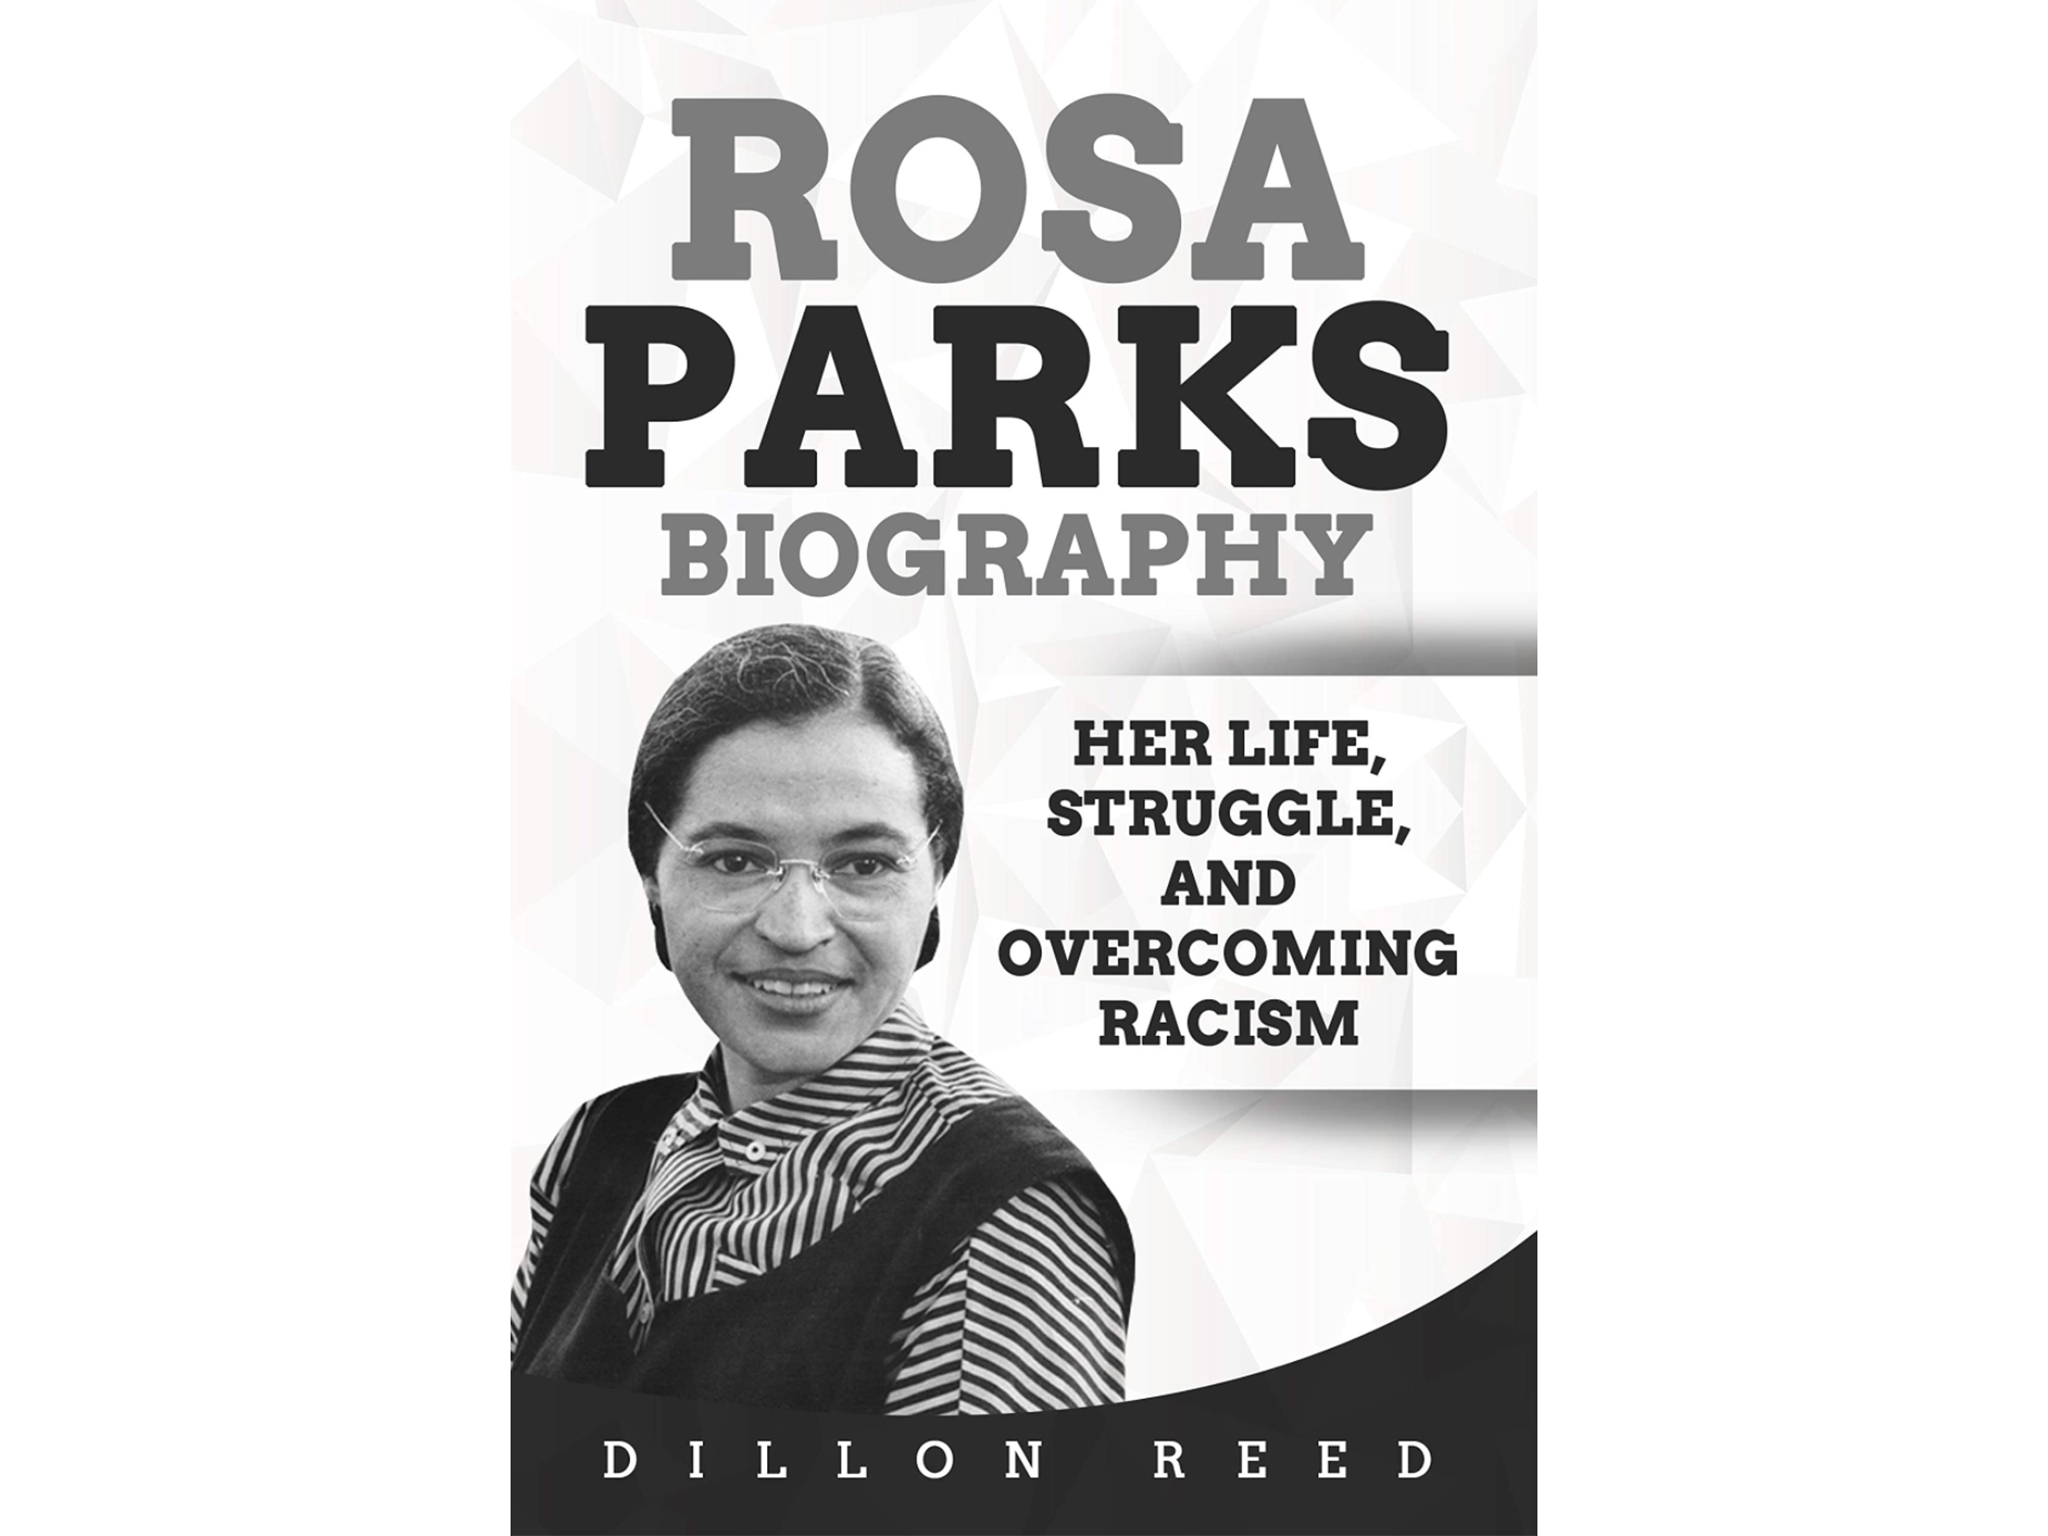 Rosa Parks Biography: Her Life, Struggle, and Overcoming Racism’ by Dillon Reed